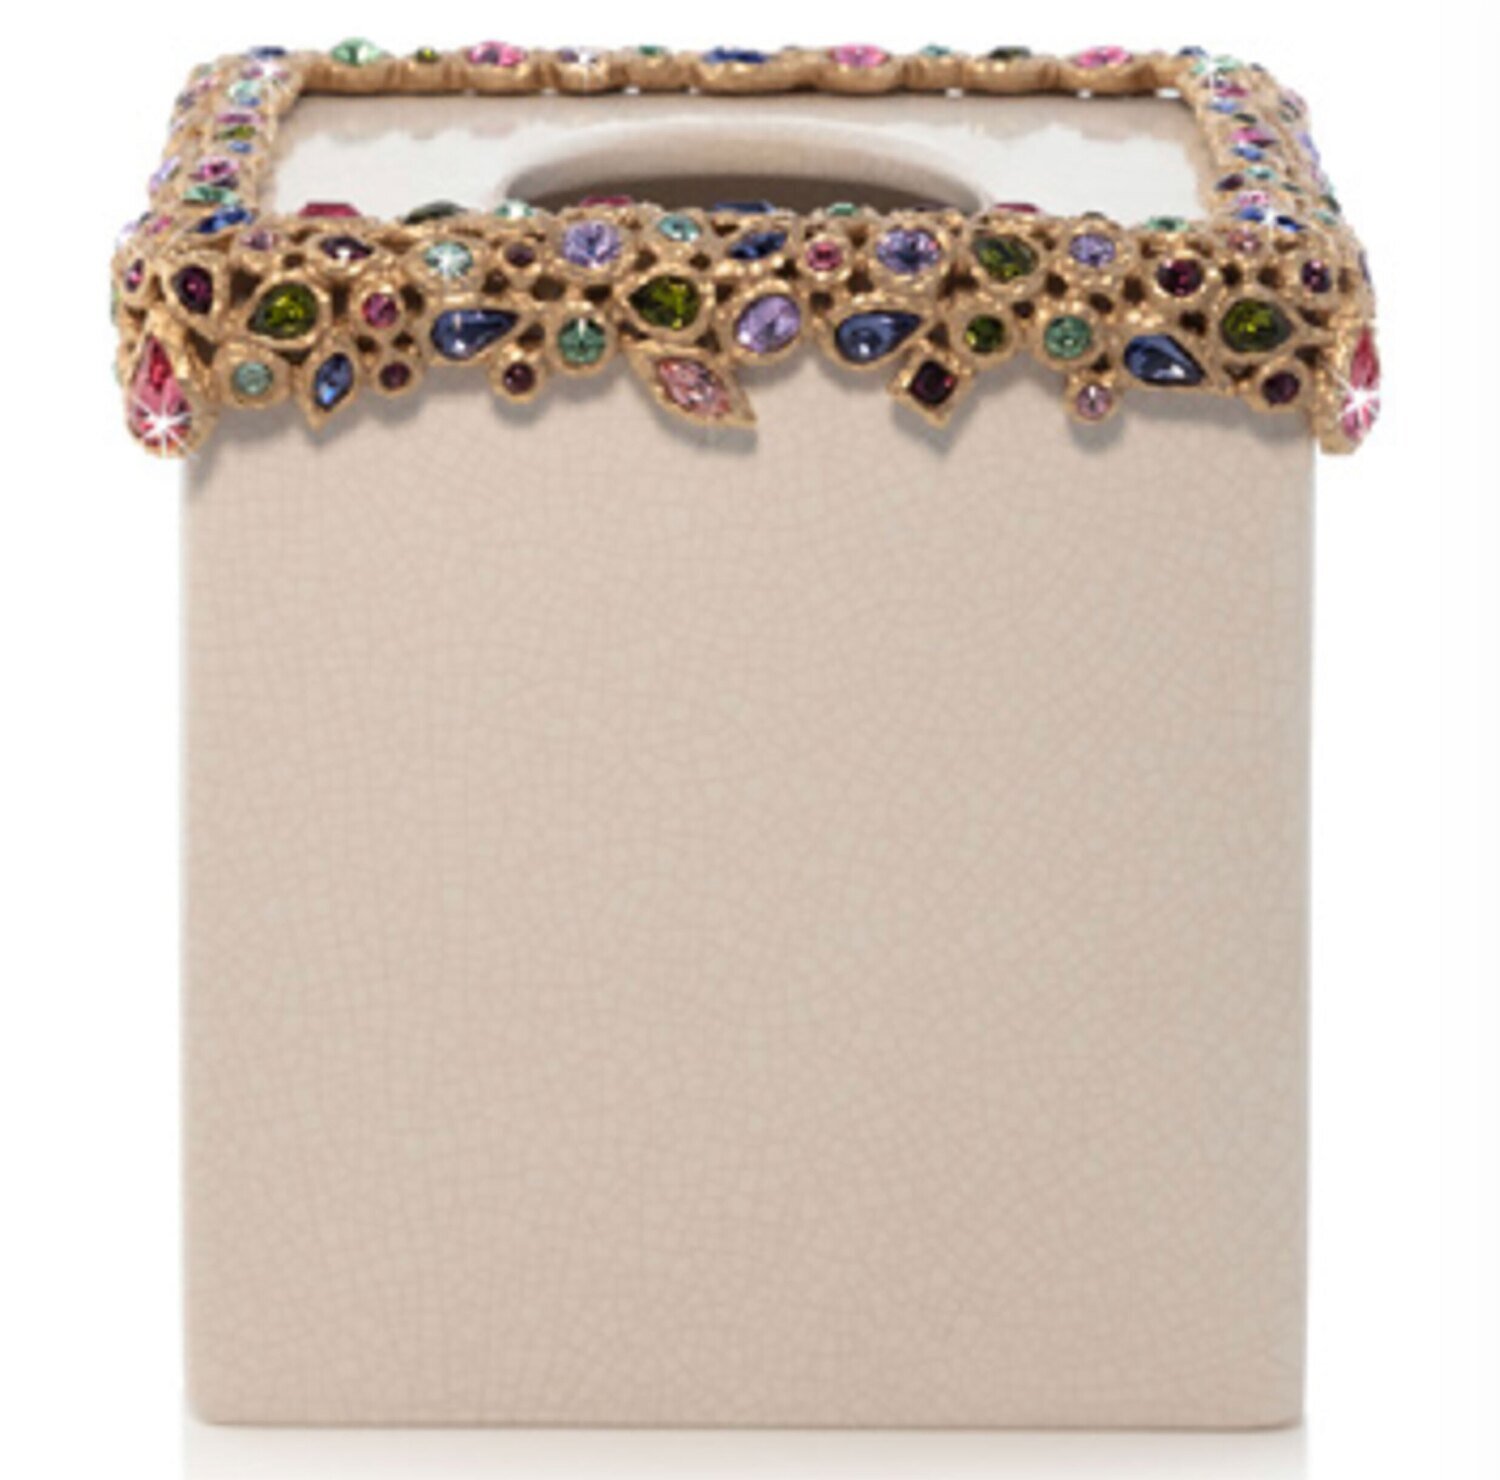 Jay Strongwater Emerson Bejeweled Tissue Box Bouquet SDH8891-289